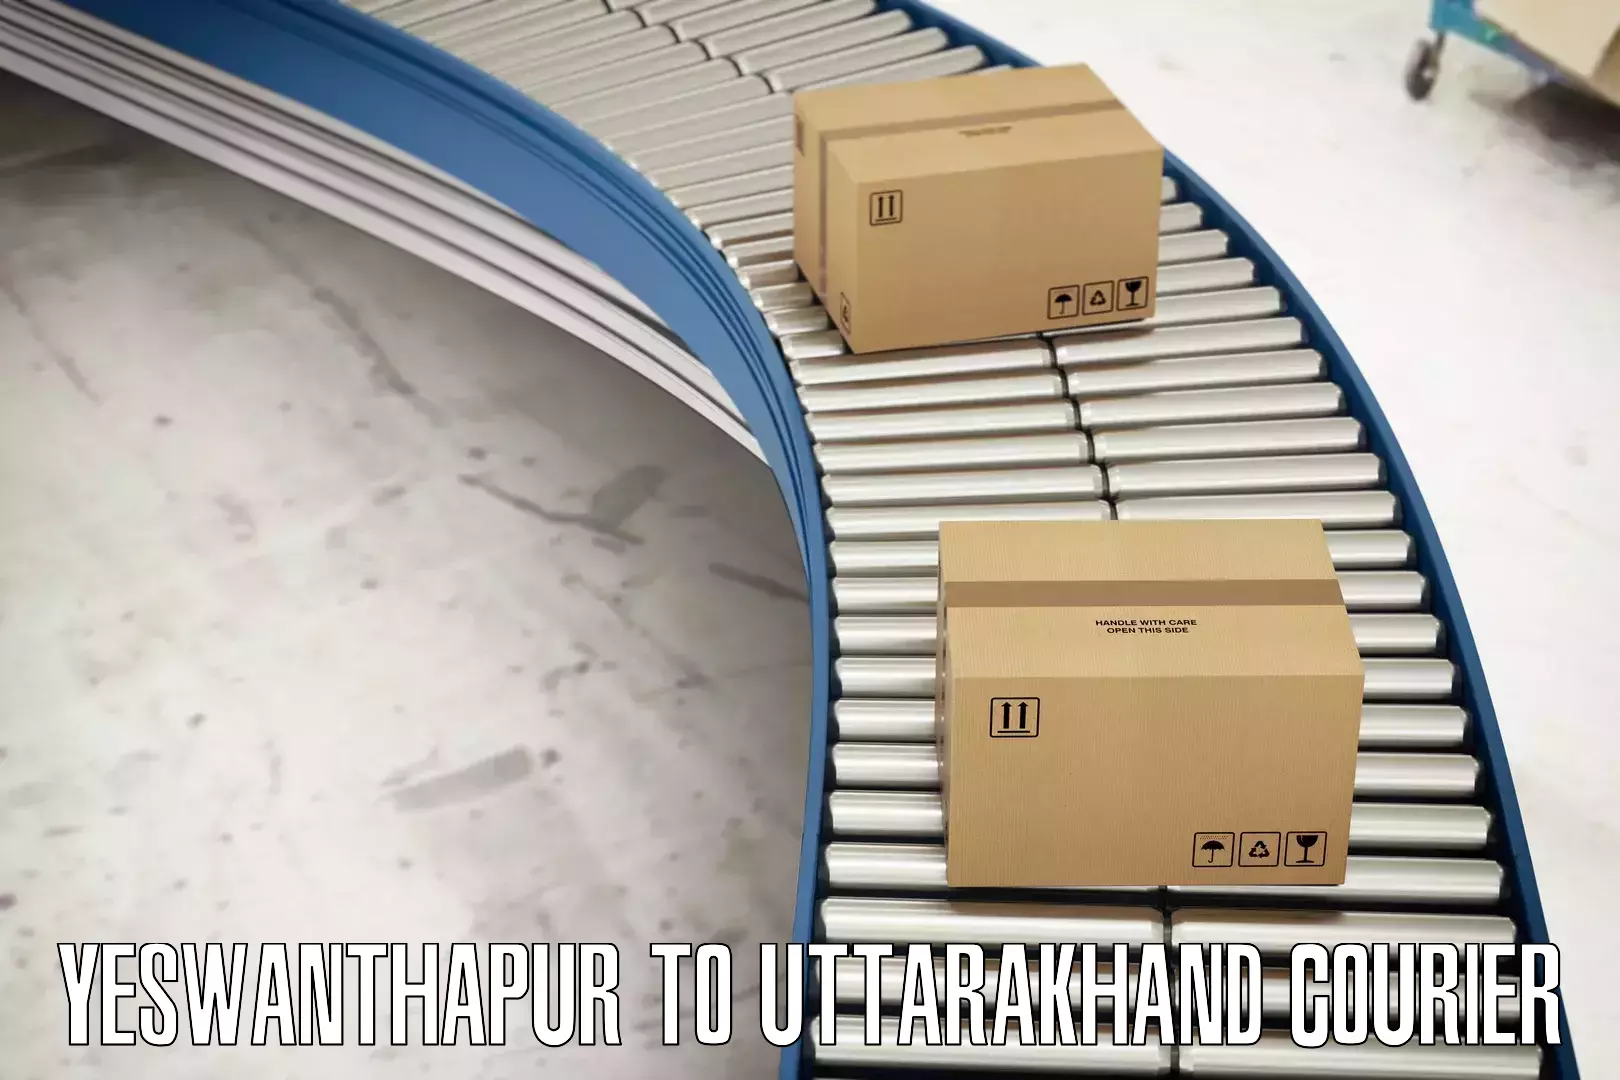 Courier service innovation Yeswanthapur to Uttarakhand